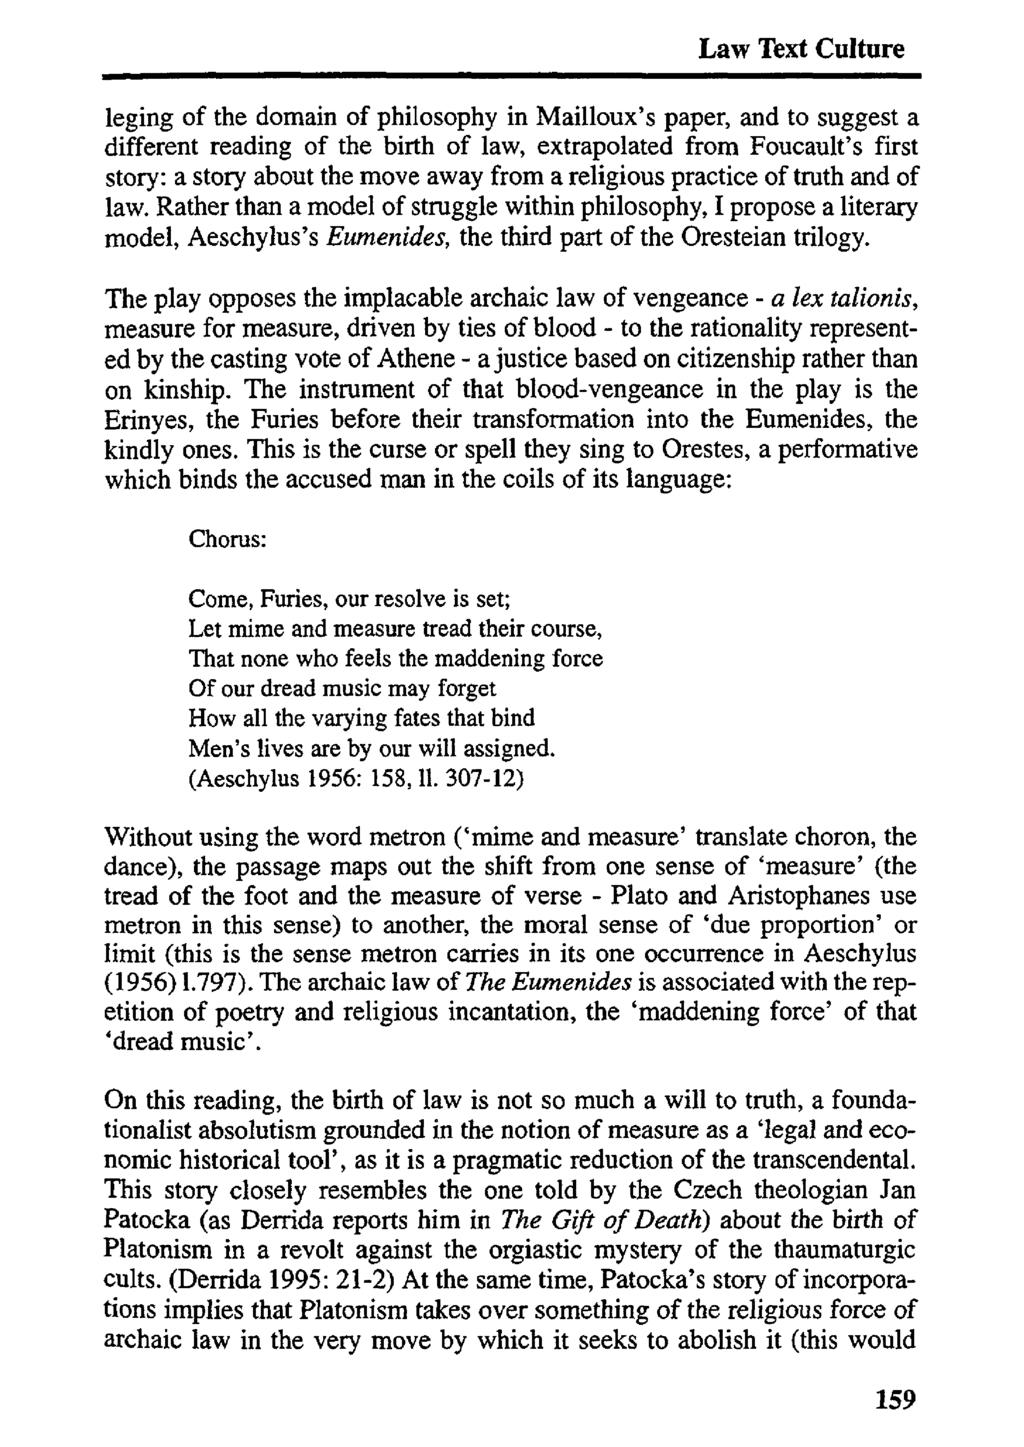 Law Text Culture leging of the domain of philosophy in Mailloux's paper, and to suggest a different reading of the birth of law, extrapolated from Foucault's first story: a story about the move away